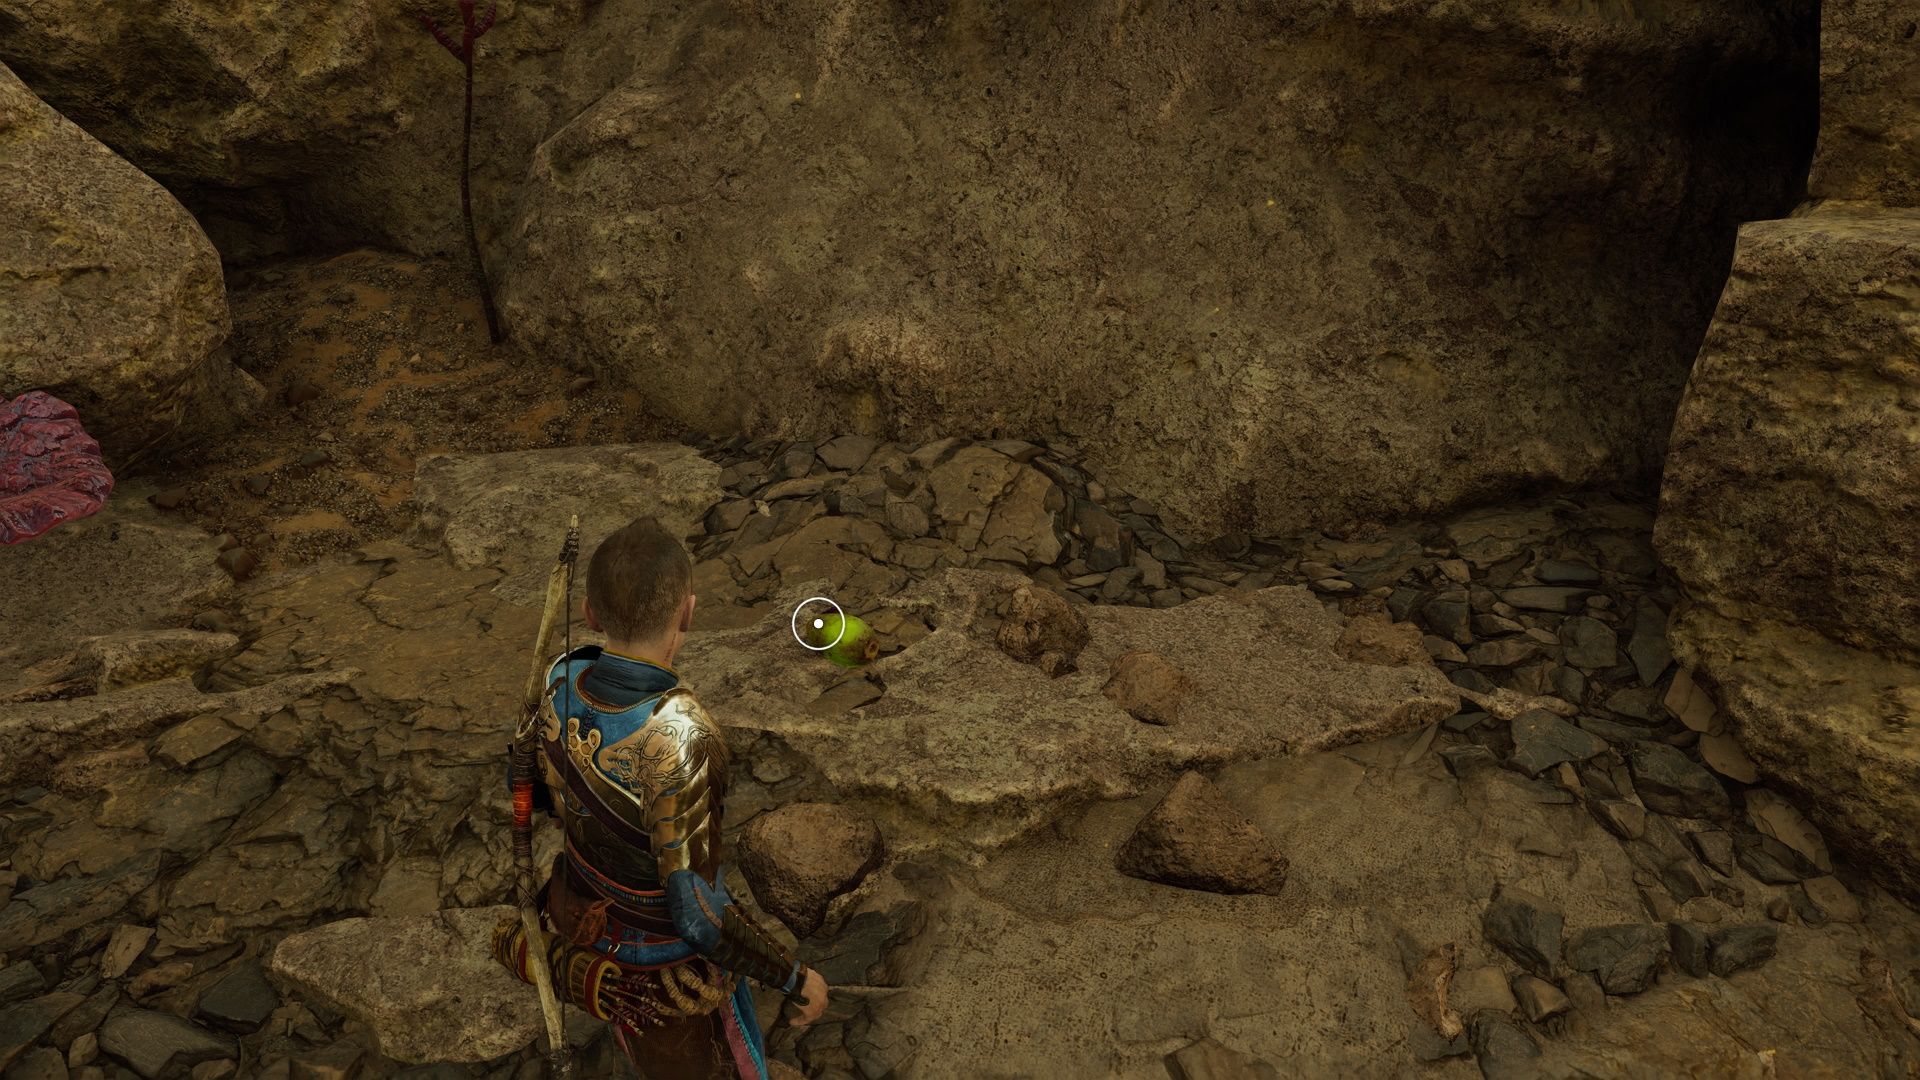 God Of War Ragnarok, The Lost Sanctuary, A Piece Of Fruit On The Ground